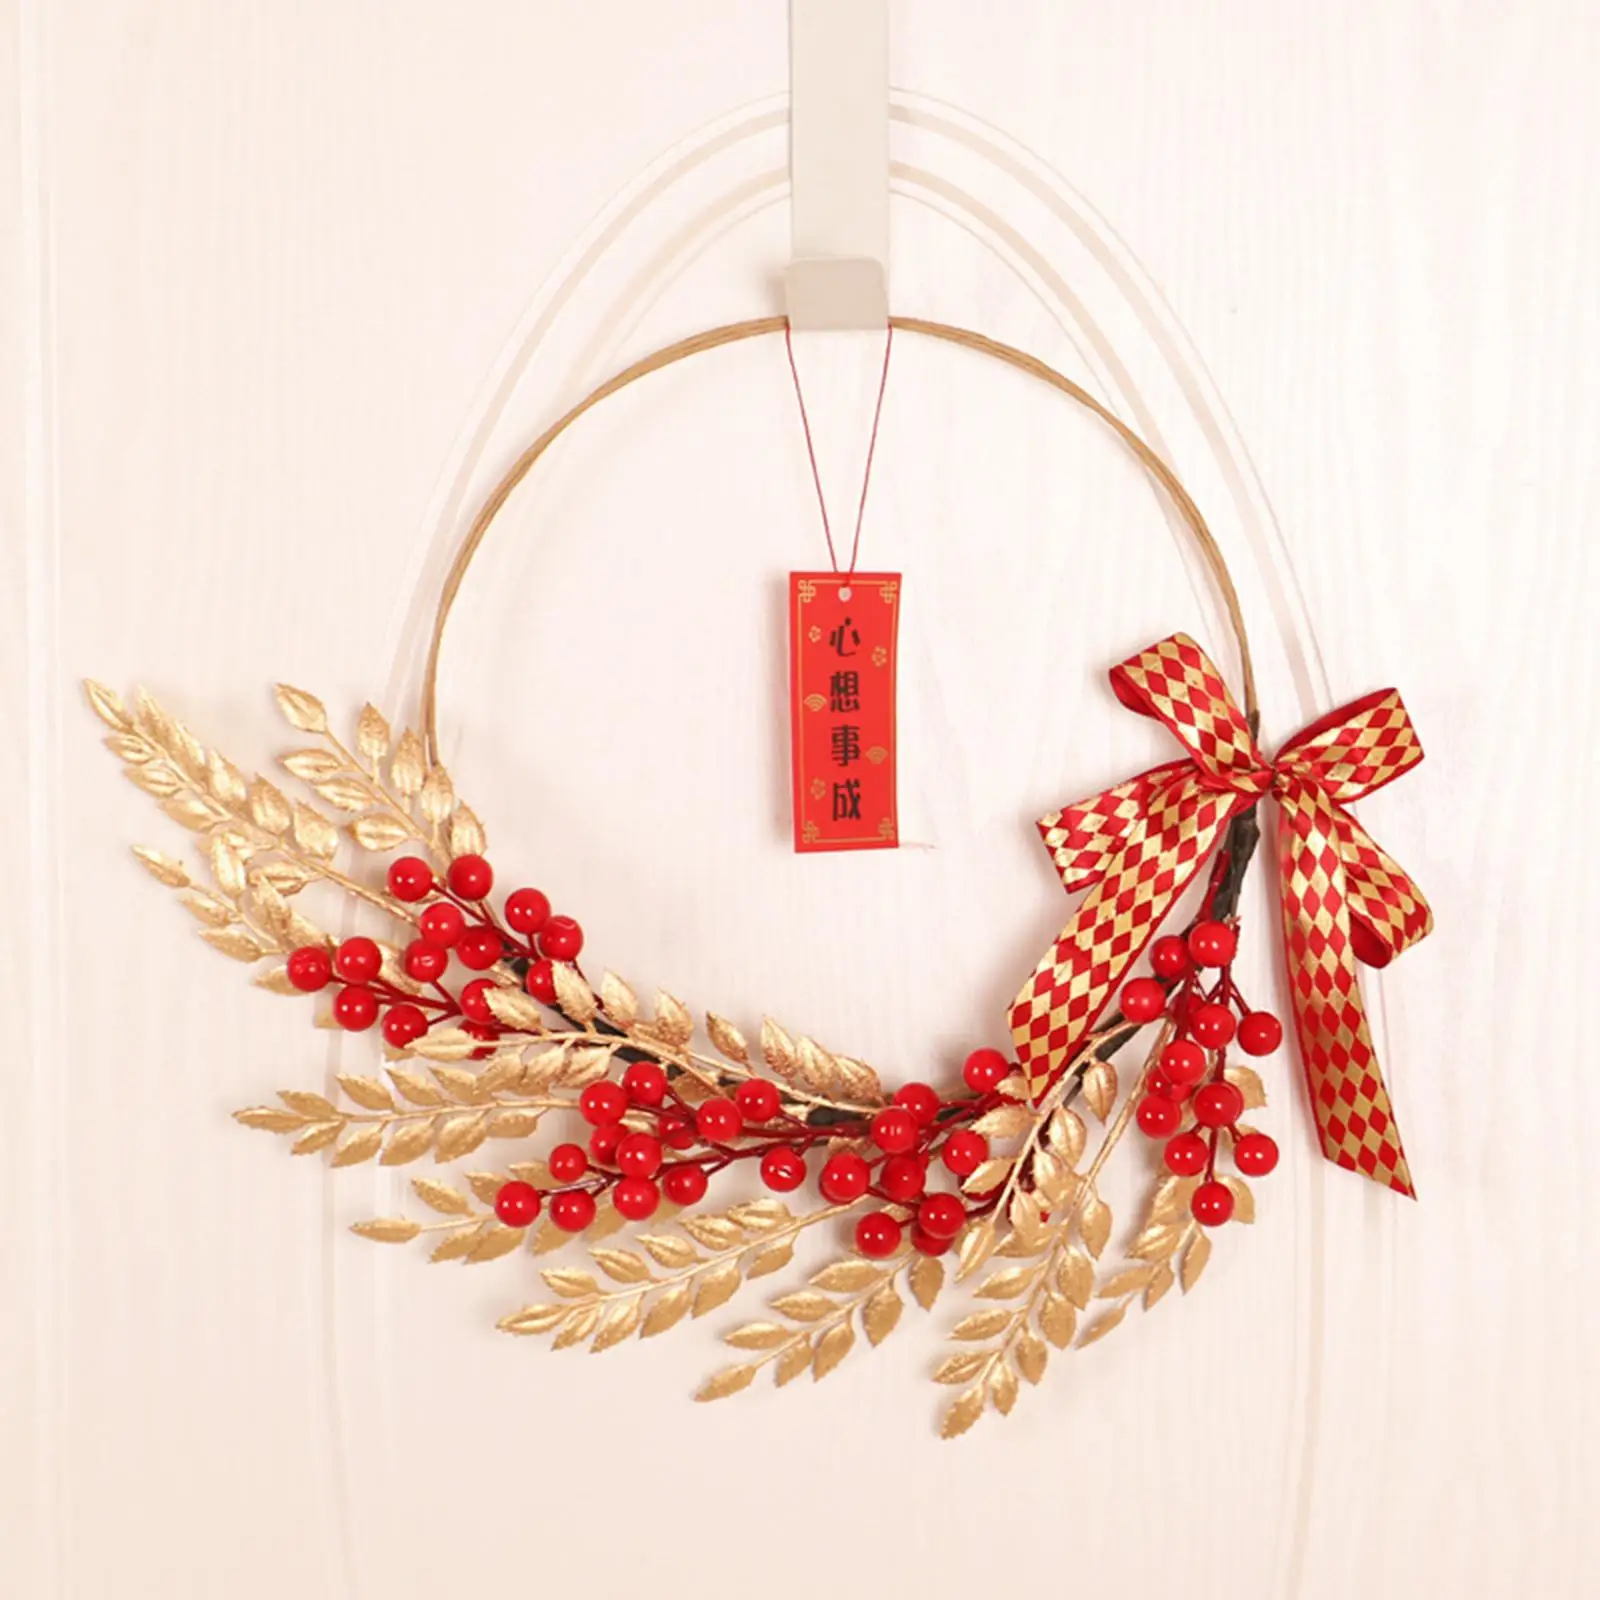 Hanging Red Berries Wreath Decoration Artificial Wire Loop Welcome Wreath for Front Door Porch New Year Holiday Thanksgiving Day